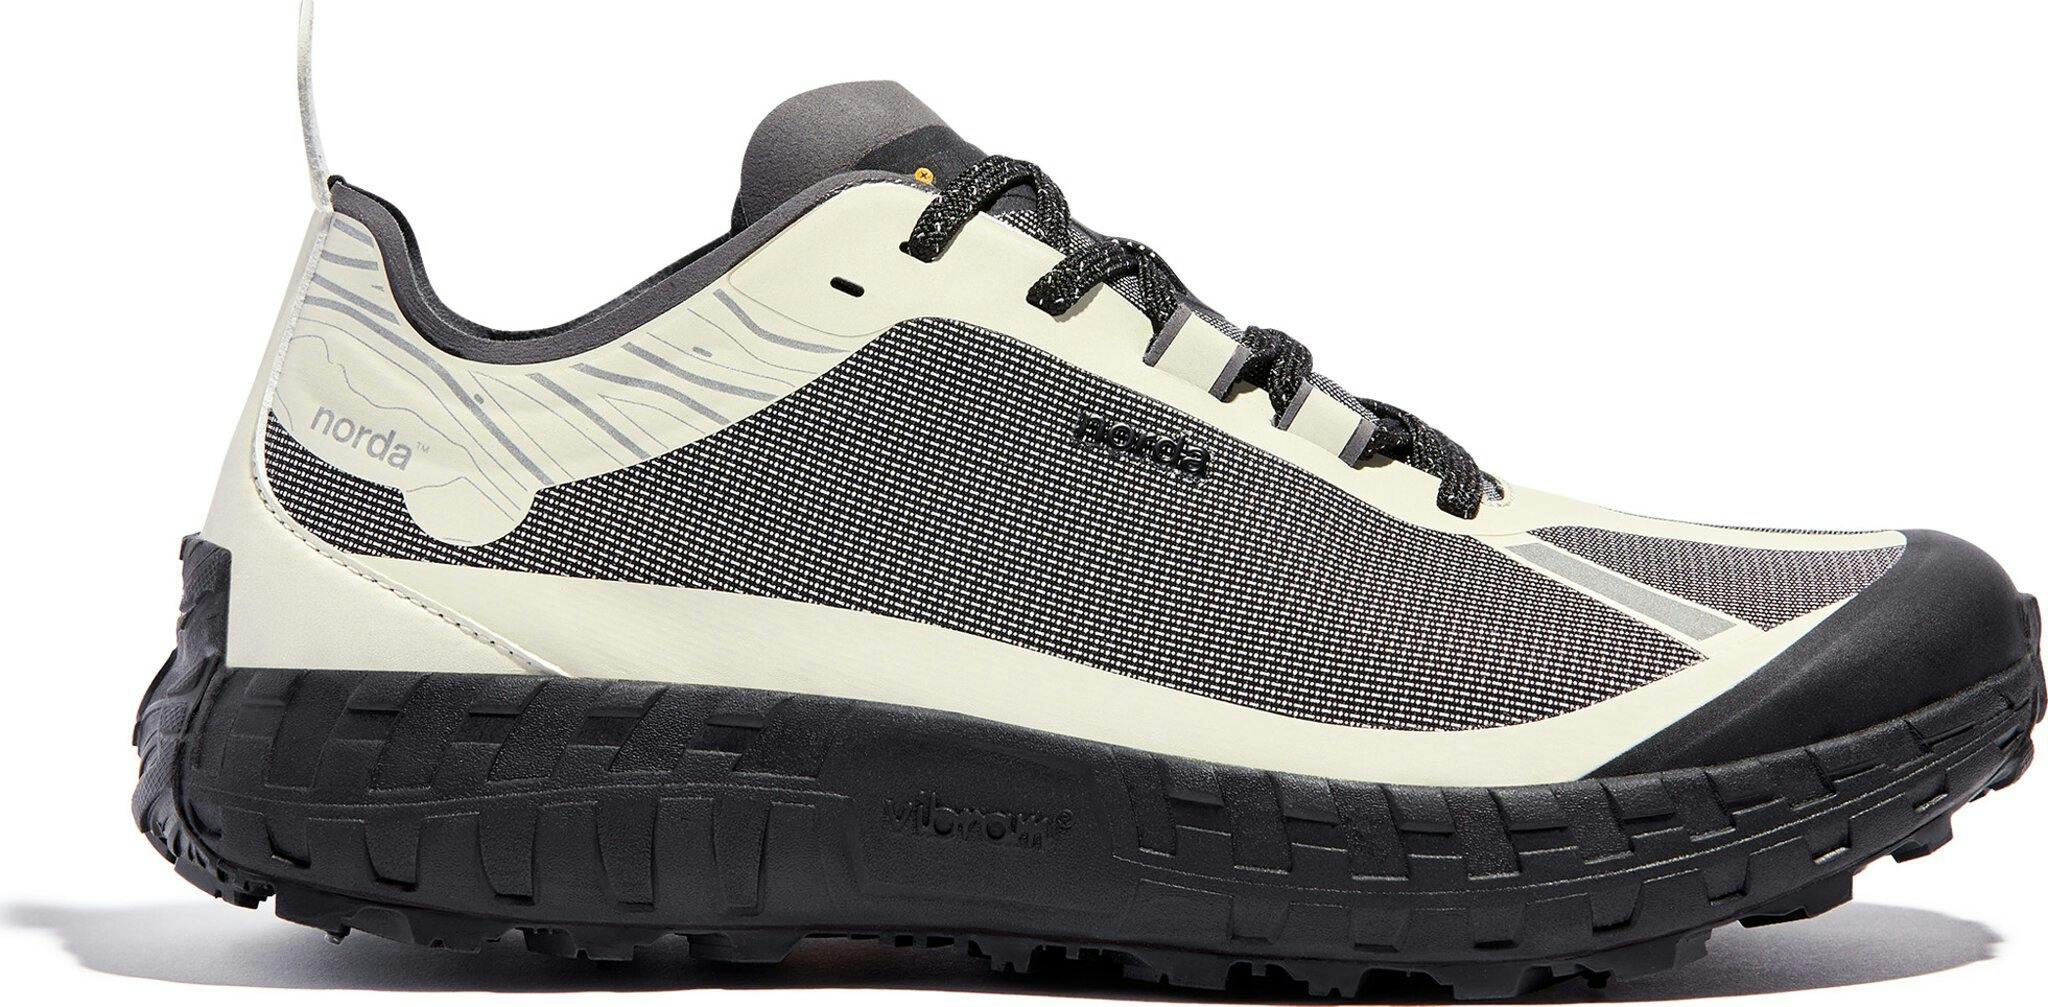 Product image for The norda 001 G+ Graphene Shoes with Carbide Tipped Spikes - Women's